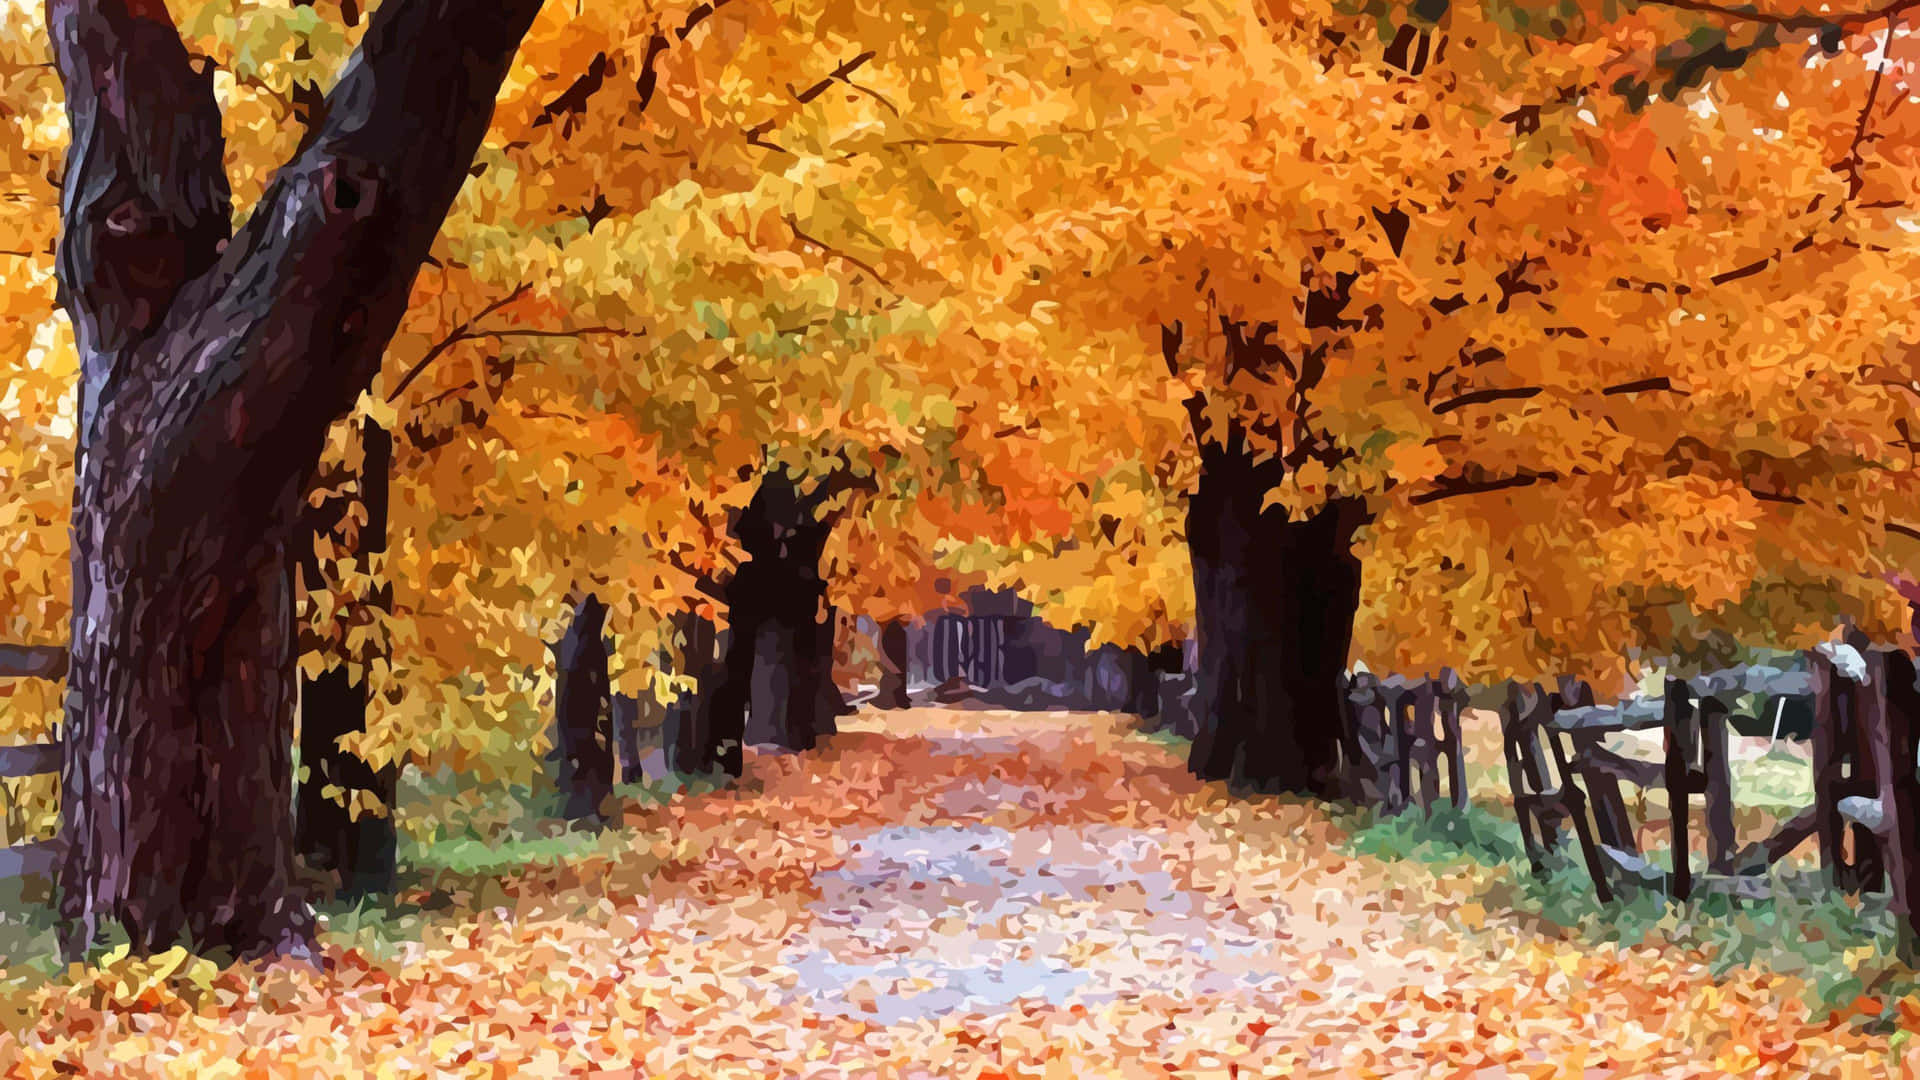 Enjoy a crisp autumn day with this 4K fall landscape Wallpaper